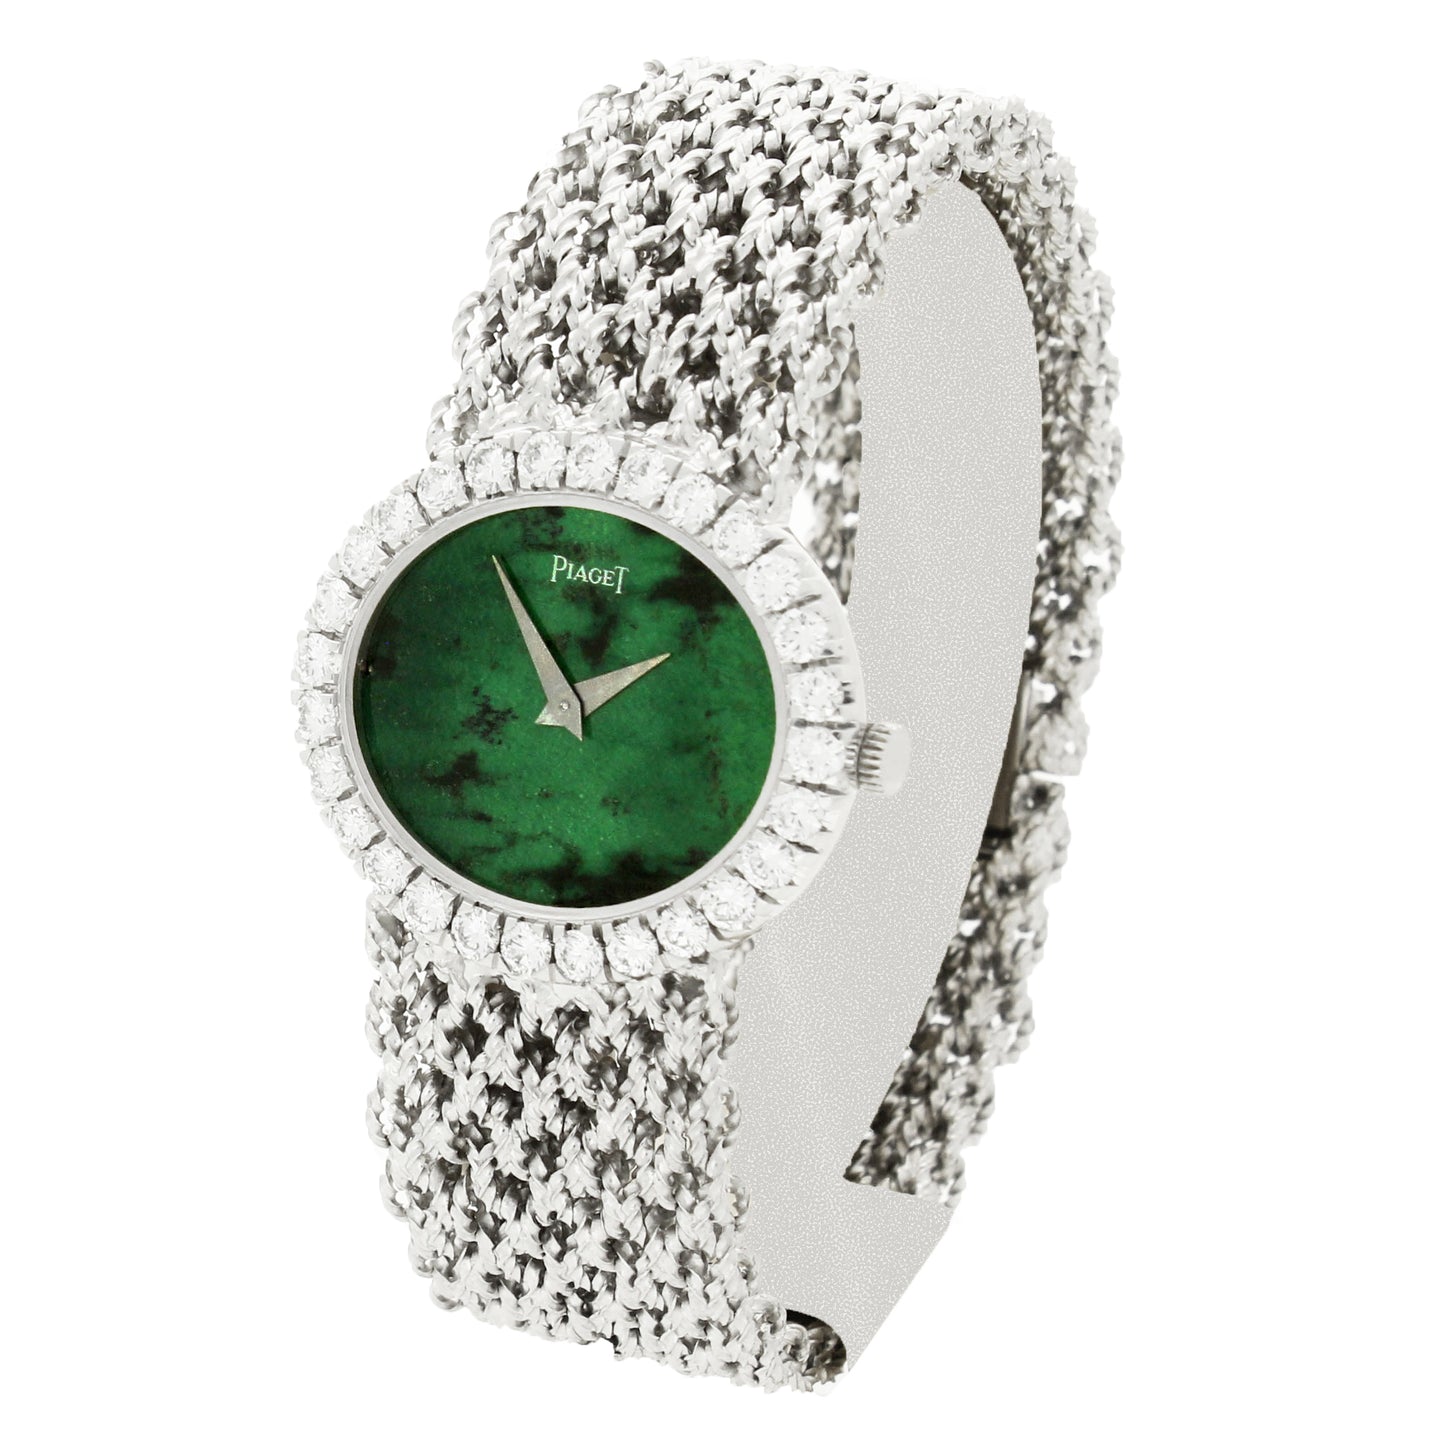 18ct white gold Piaget 'oval cased with jadeite dial and diamond set bezel bracelet watch. Made 1970's